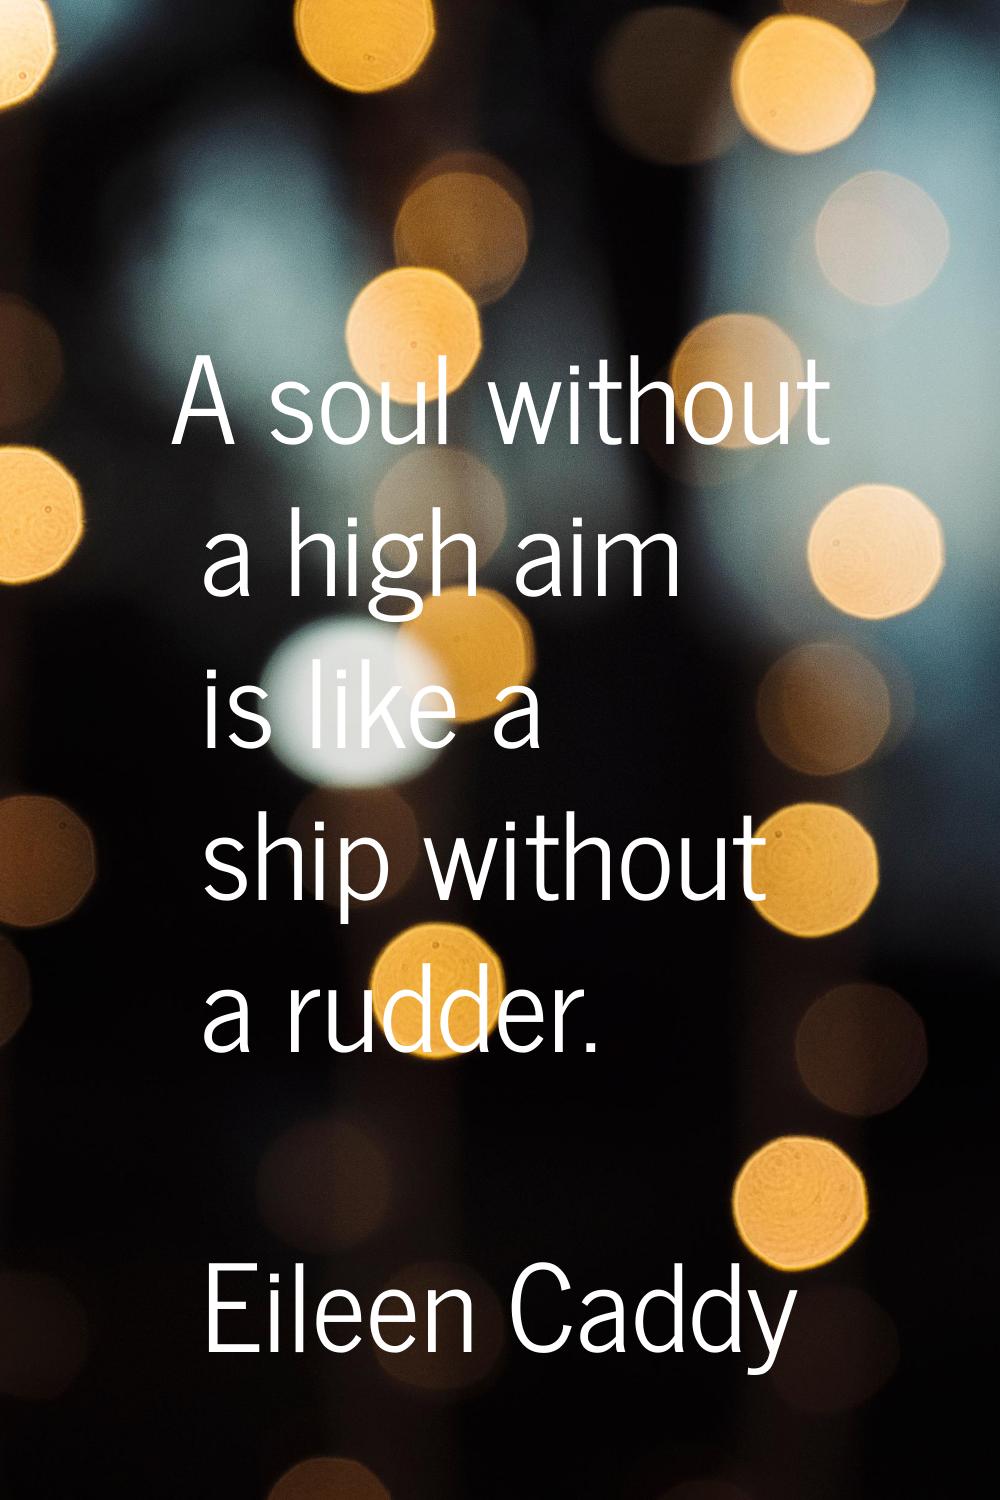 A soul without a high aim is like a ship without a rudder.